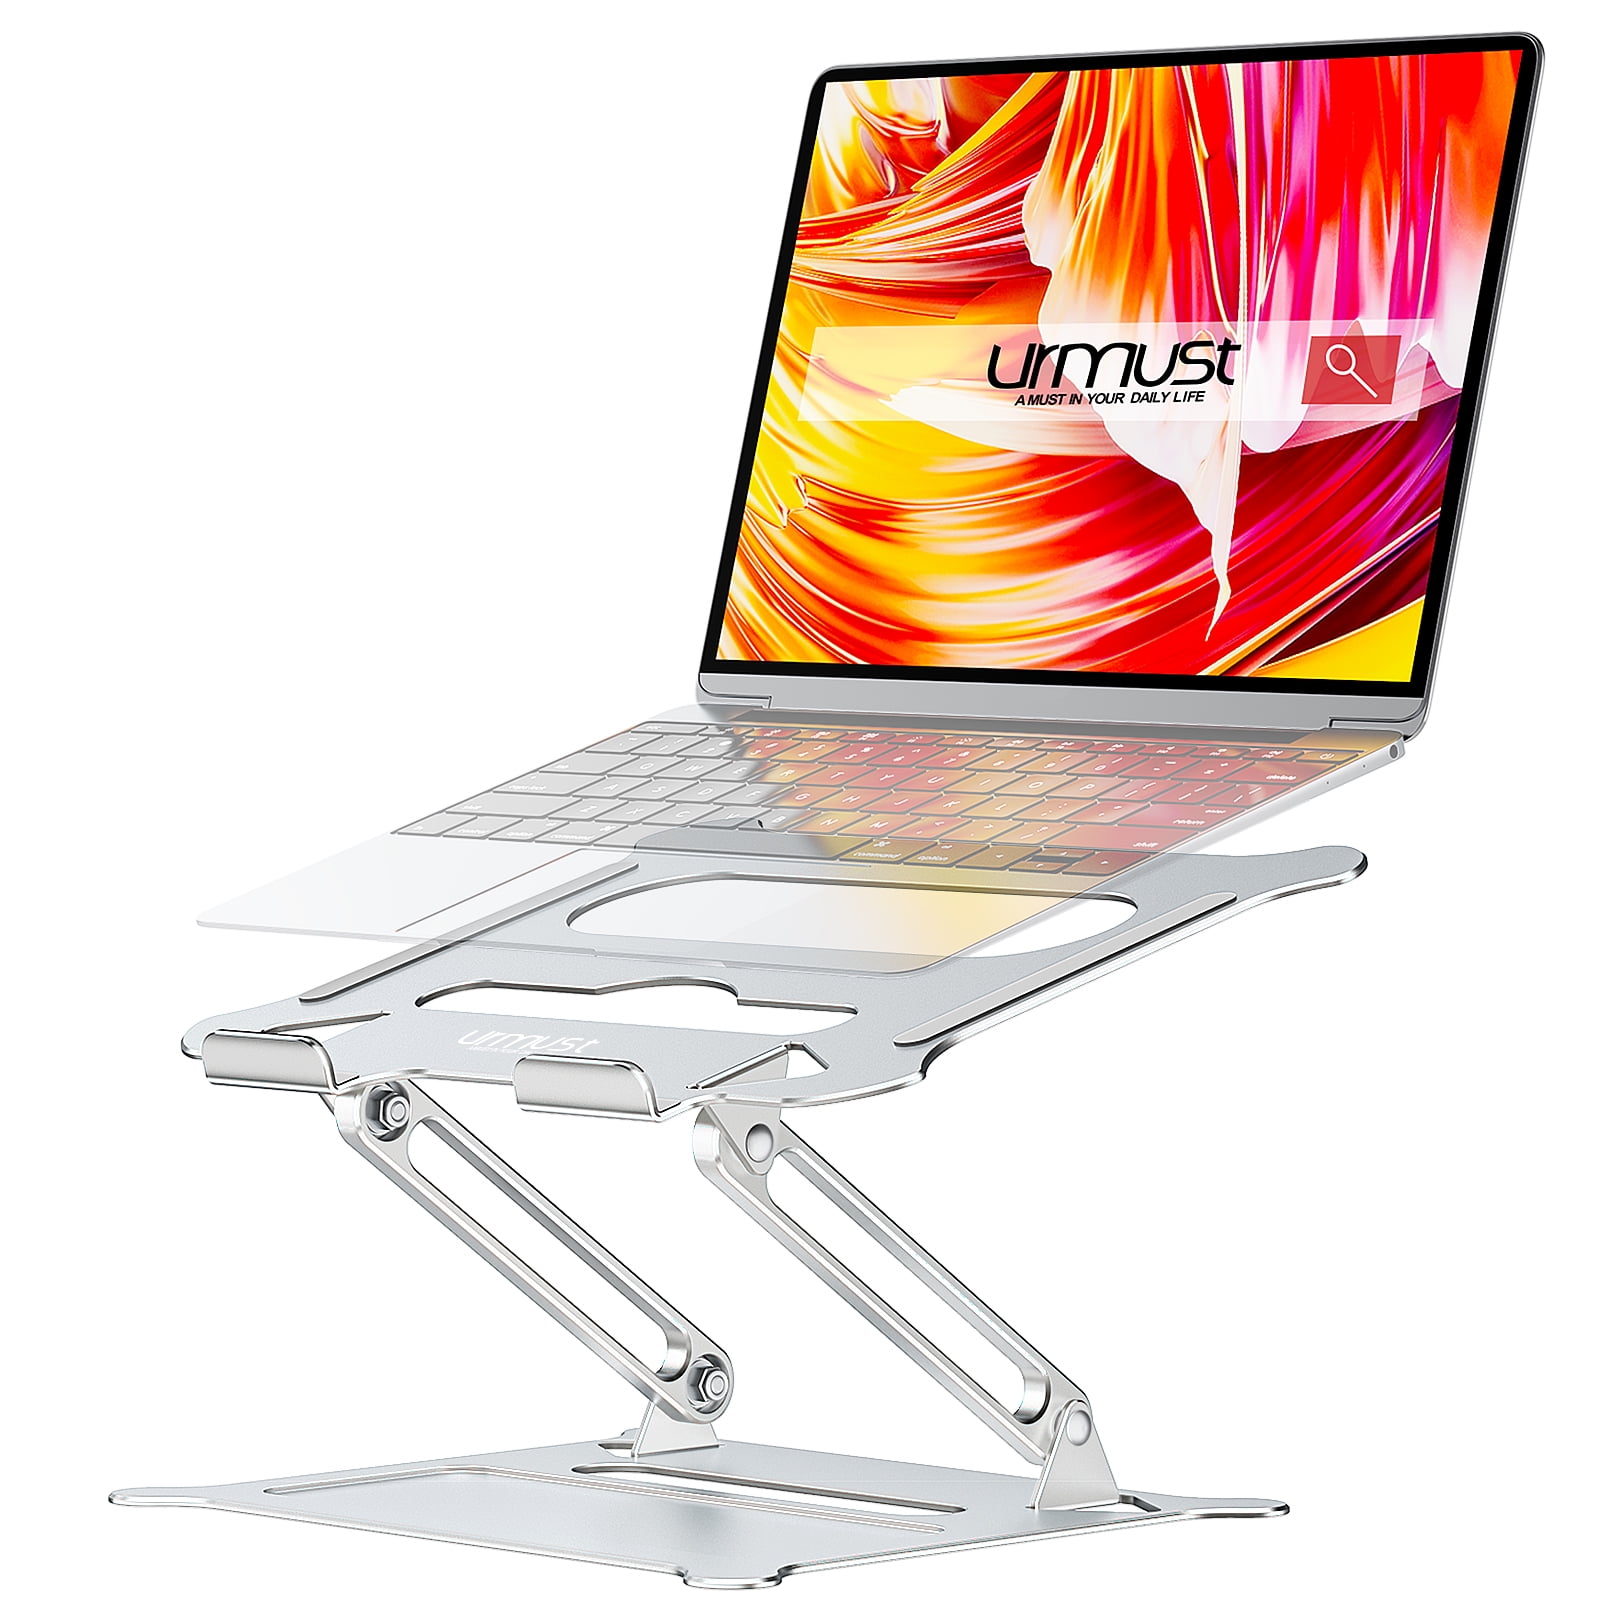 Laptop Stand for Desk - Adjustable Laptop Stand Holder Portable Laptop  Riser with Multi-Angle Height Adjustable Computer Stand for MacBook Air/Pro  and